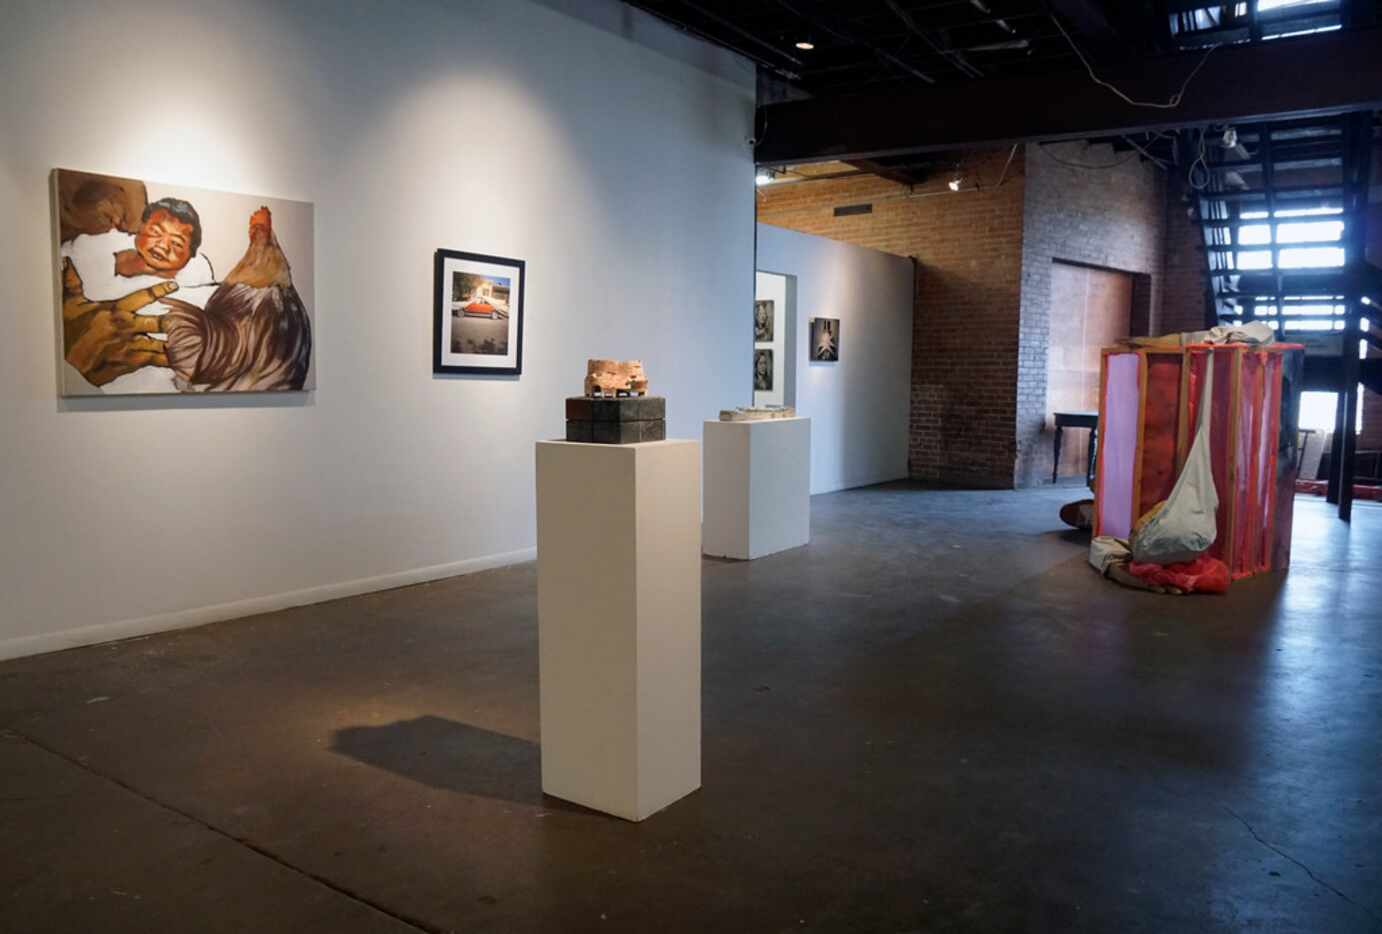 Contemporary art from photography to new media fills the space at 500X Gallery.